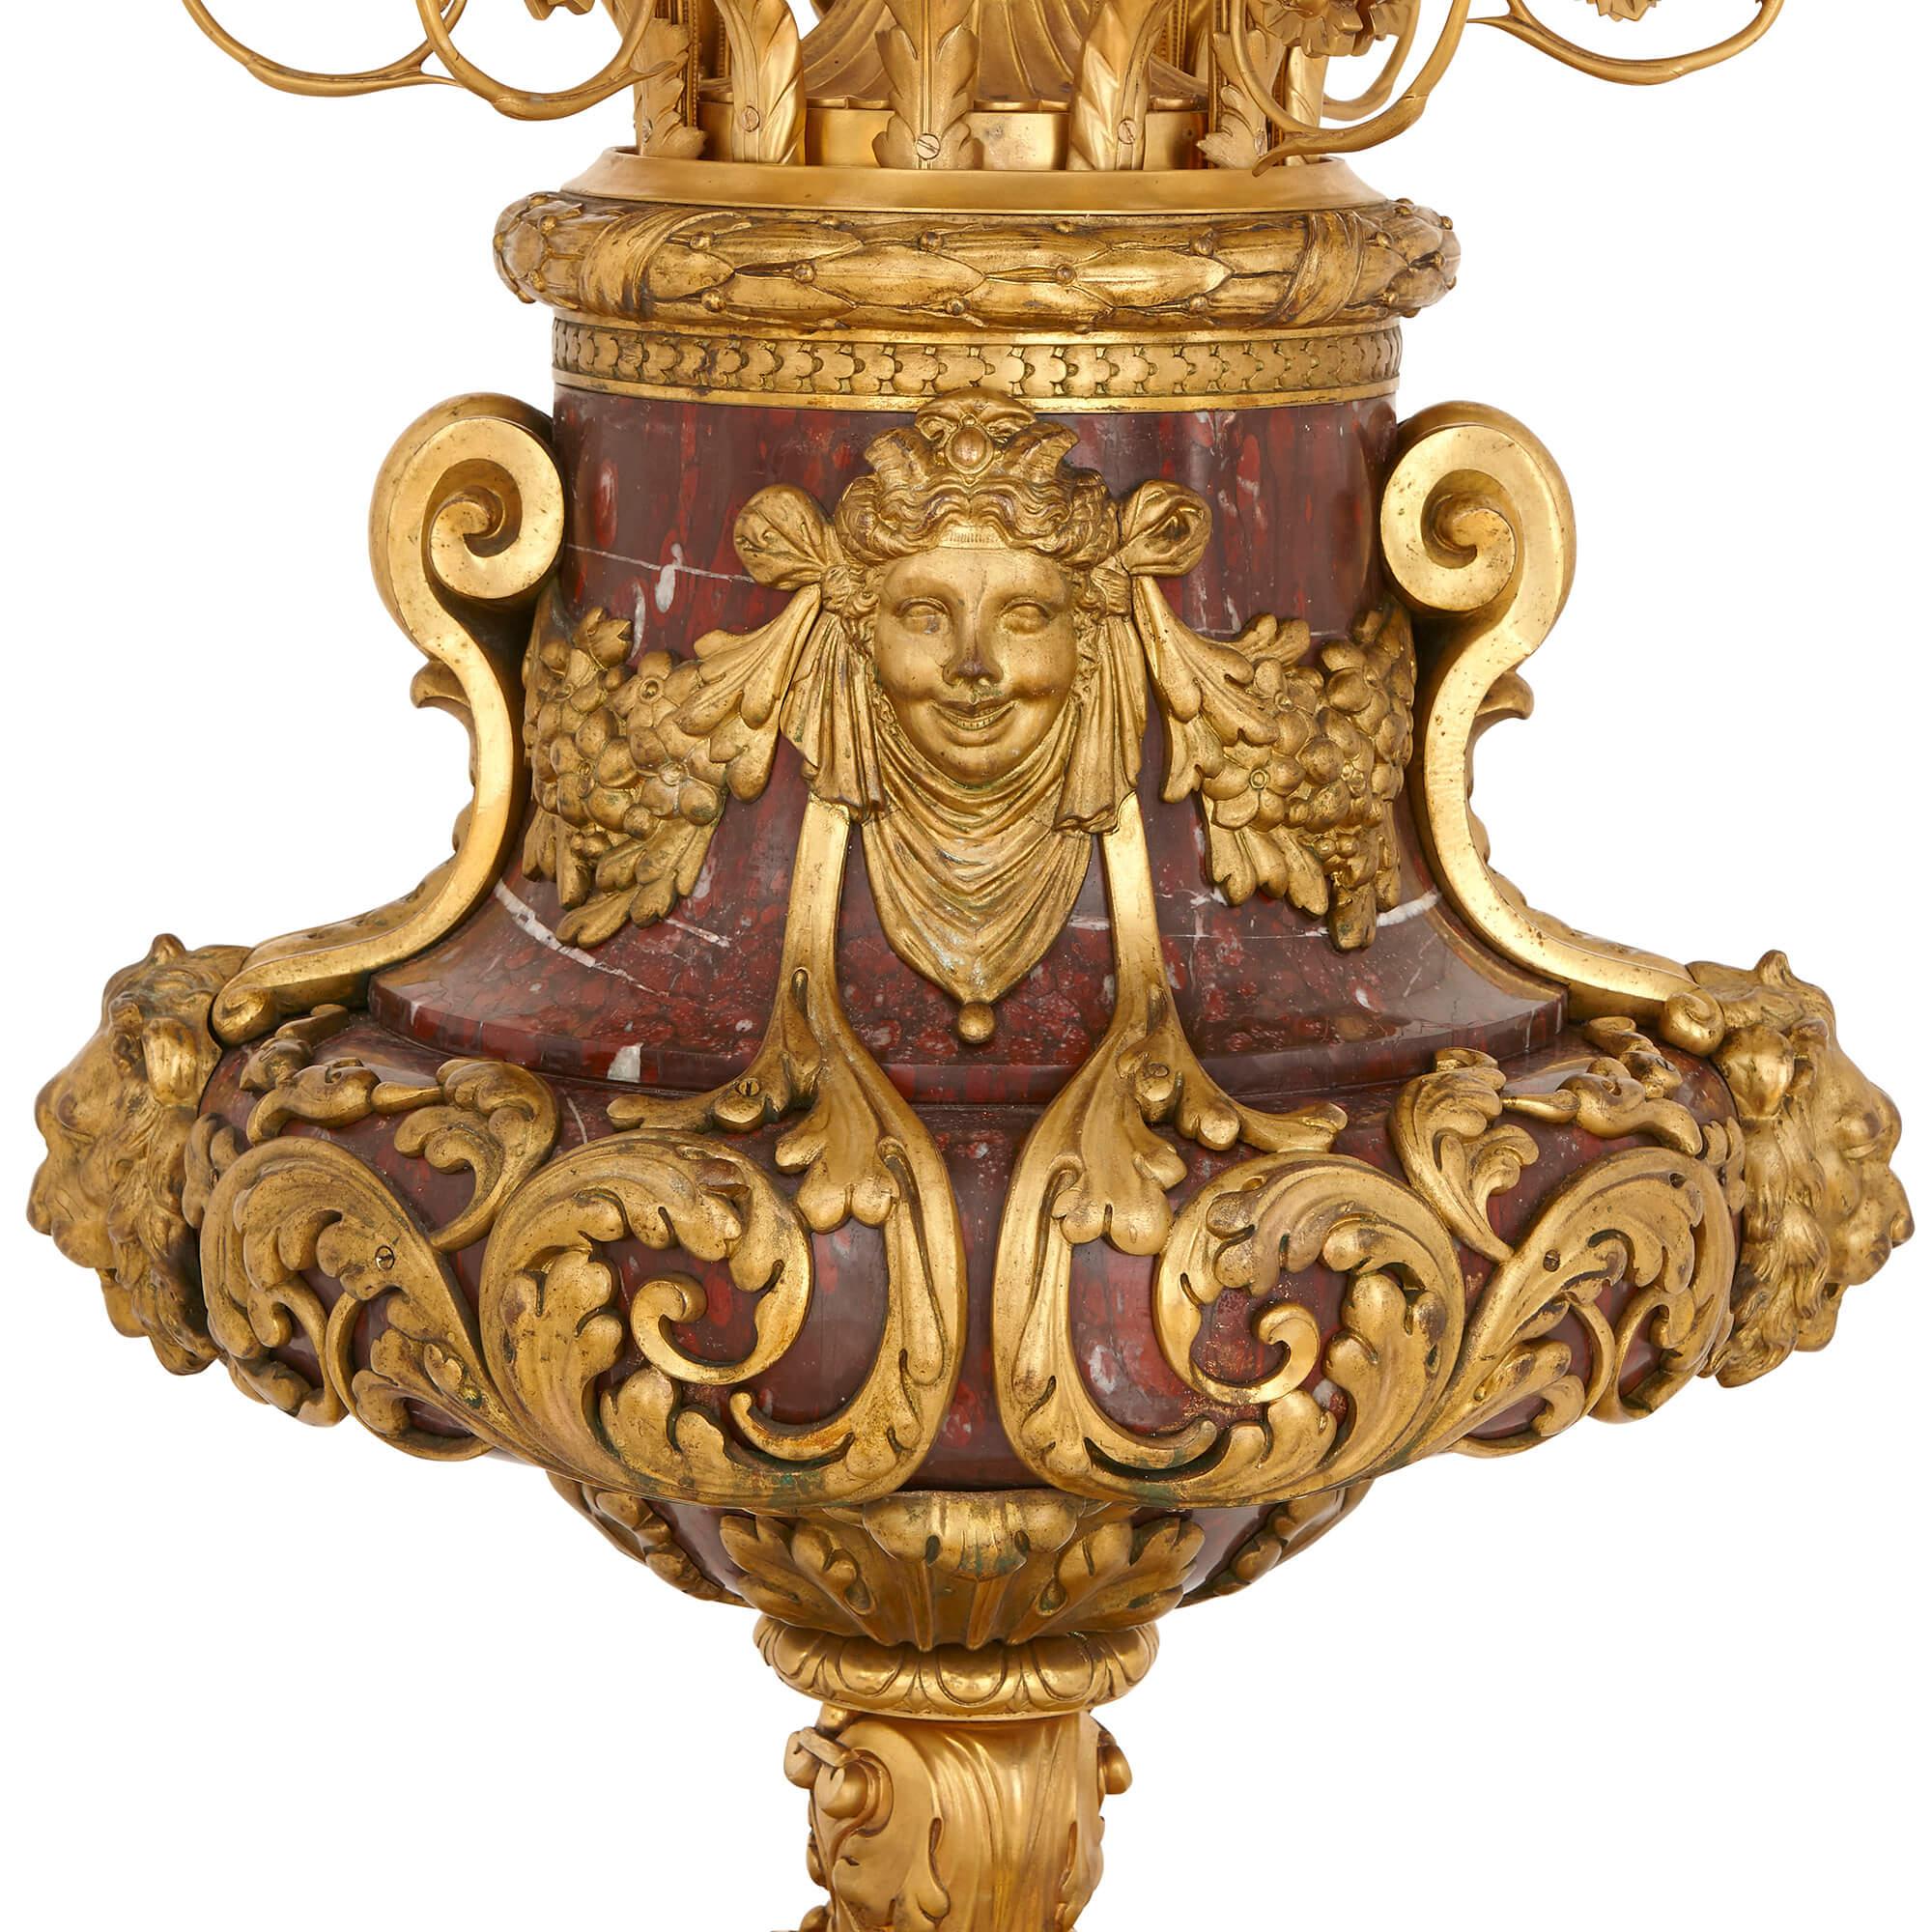 These exceptional, large pair of red marble and gilt bronze candelabra is opulently decorated finely-cast neoclassical style decorations. Each candelabrum is formed as a red marble vase on a gilt bronze base, with twelve gilt bronze lights